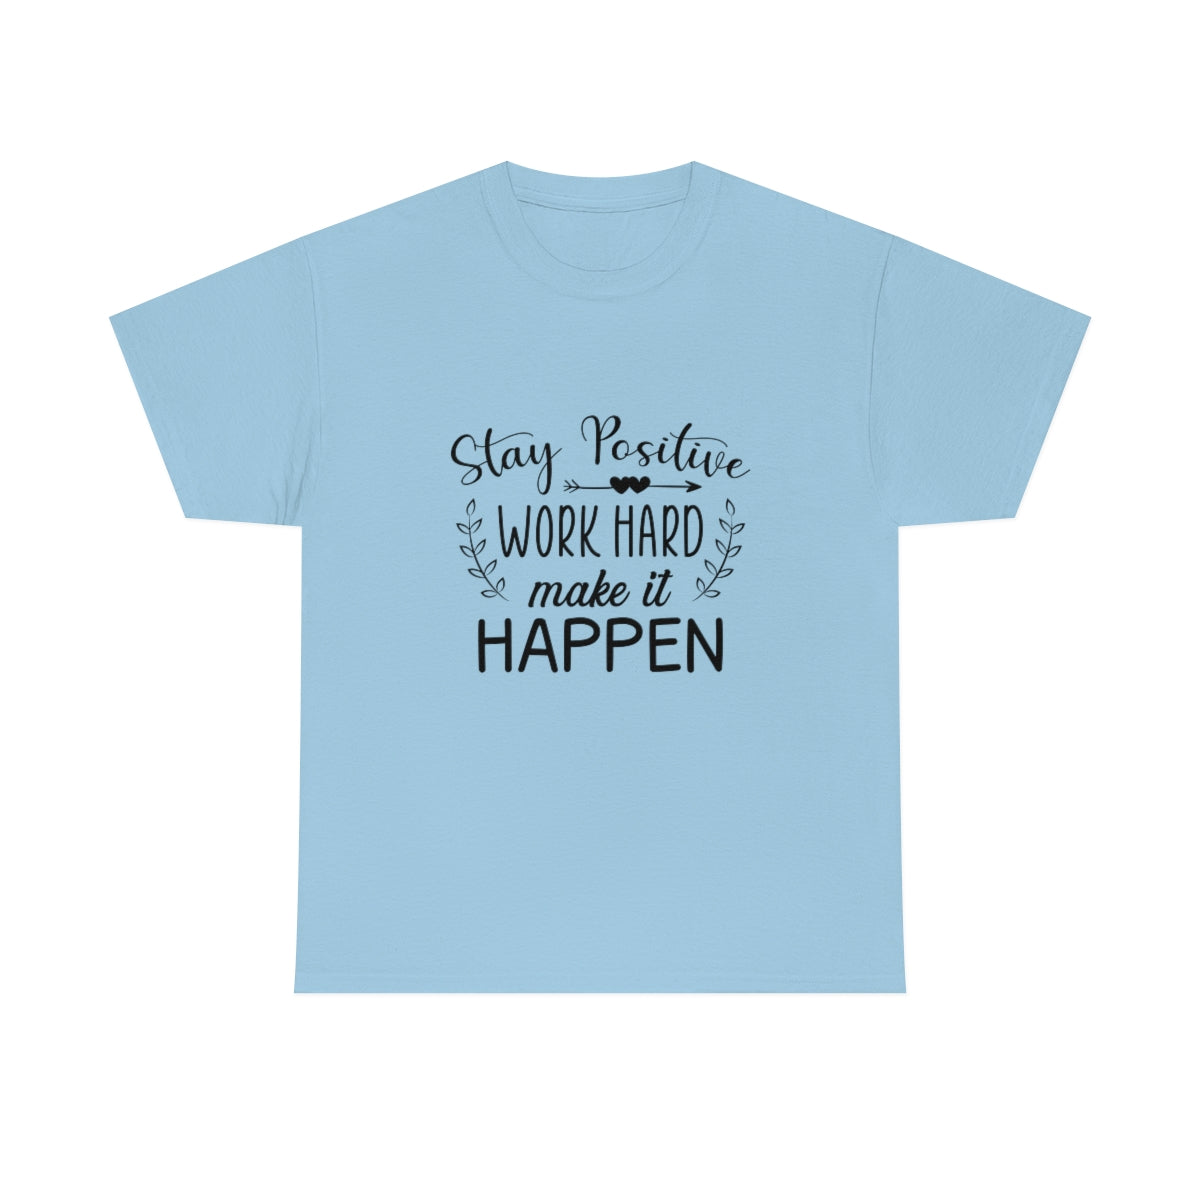 Stay Positive work hard and make it happen - Cotton Tee